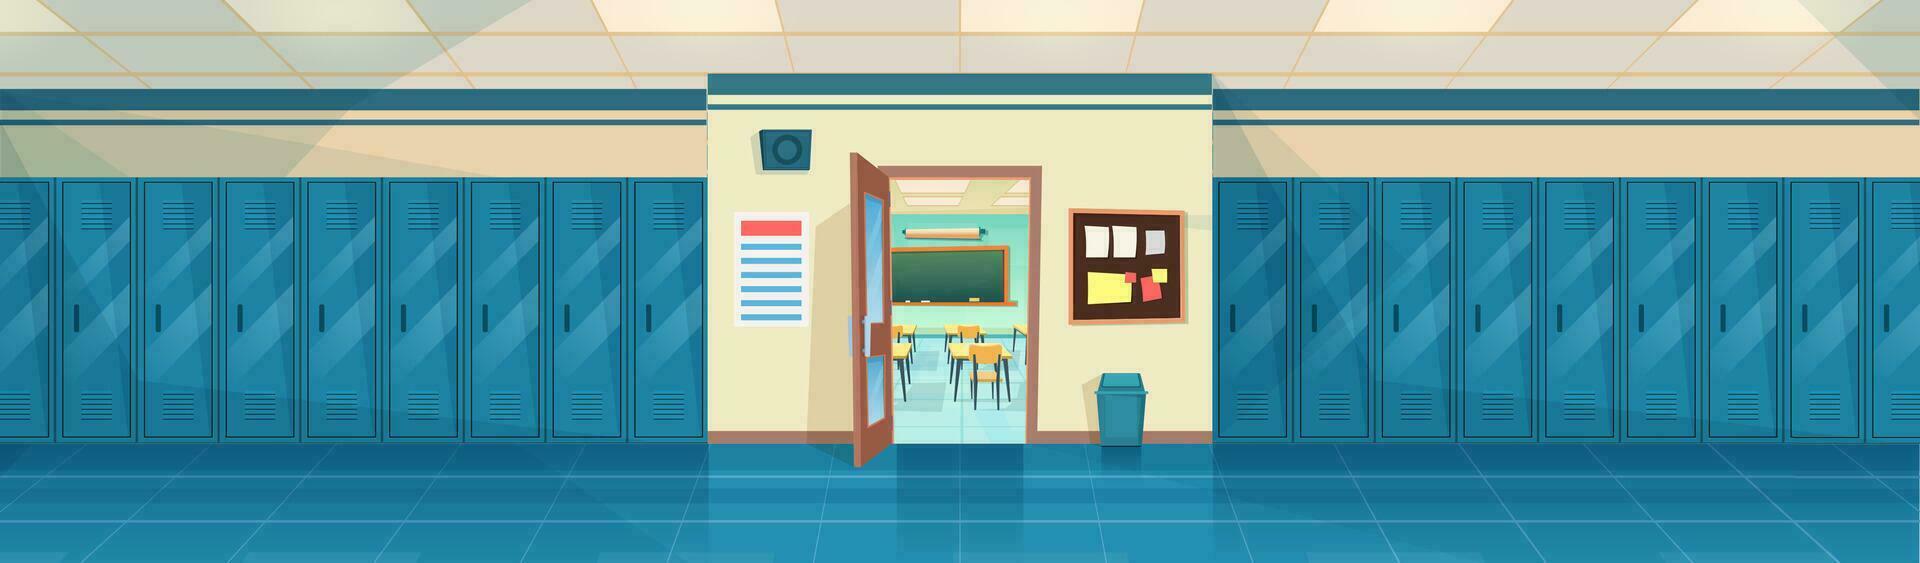 Empty School Corridor Interior With Row Of Lockers,and open door in classroom. Horizontal Banner. cartoon College campus hall or university lobby. Vector illustration in a flat style